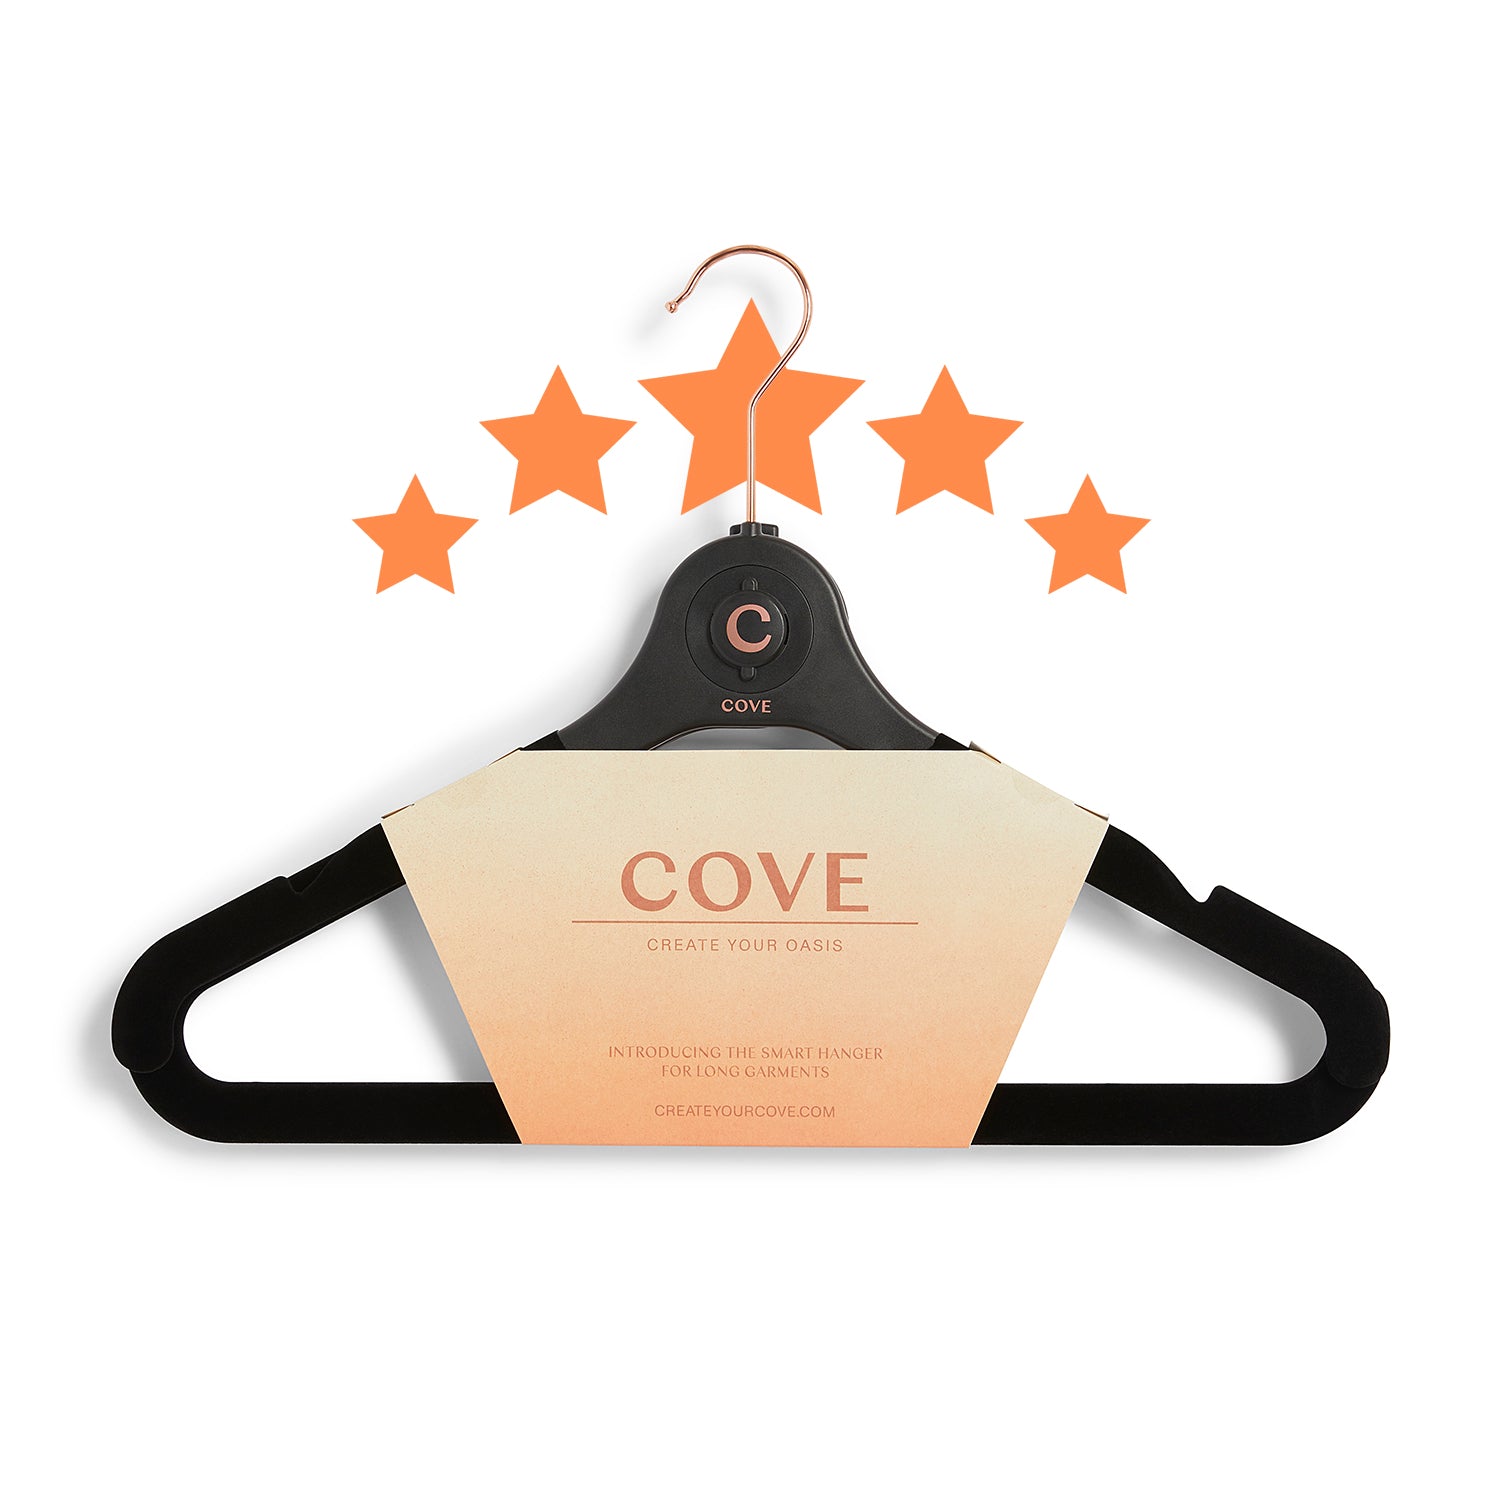 Everyone’s Raving About the Cove Hanger